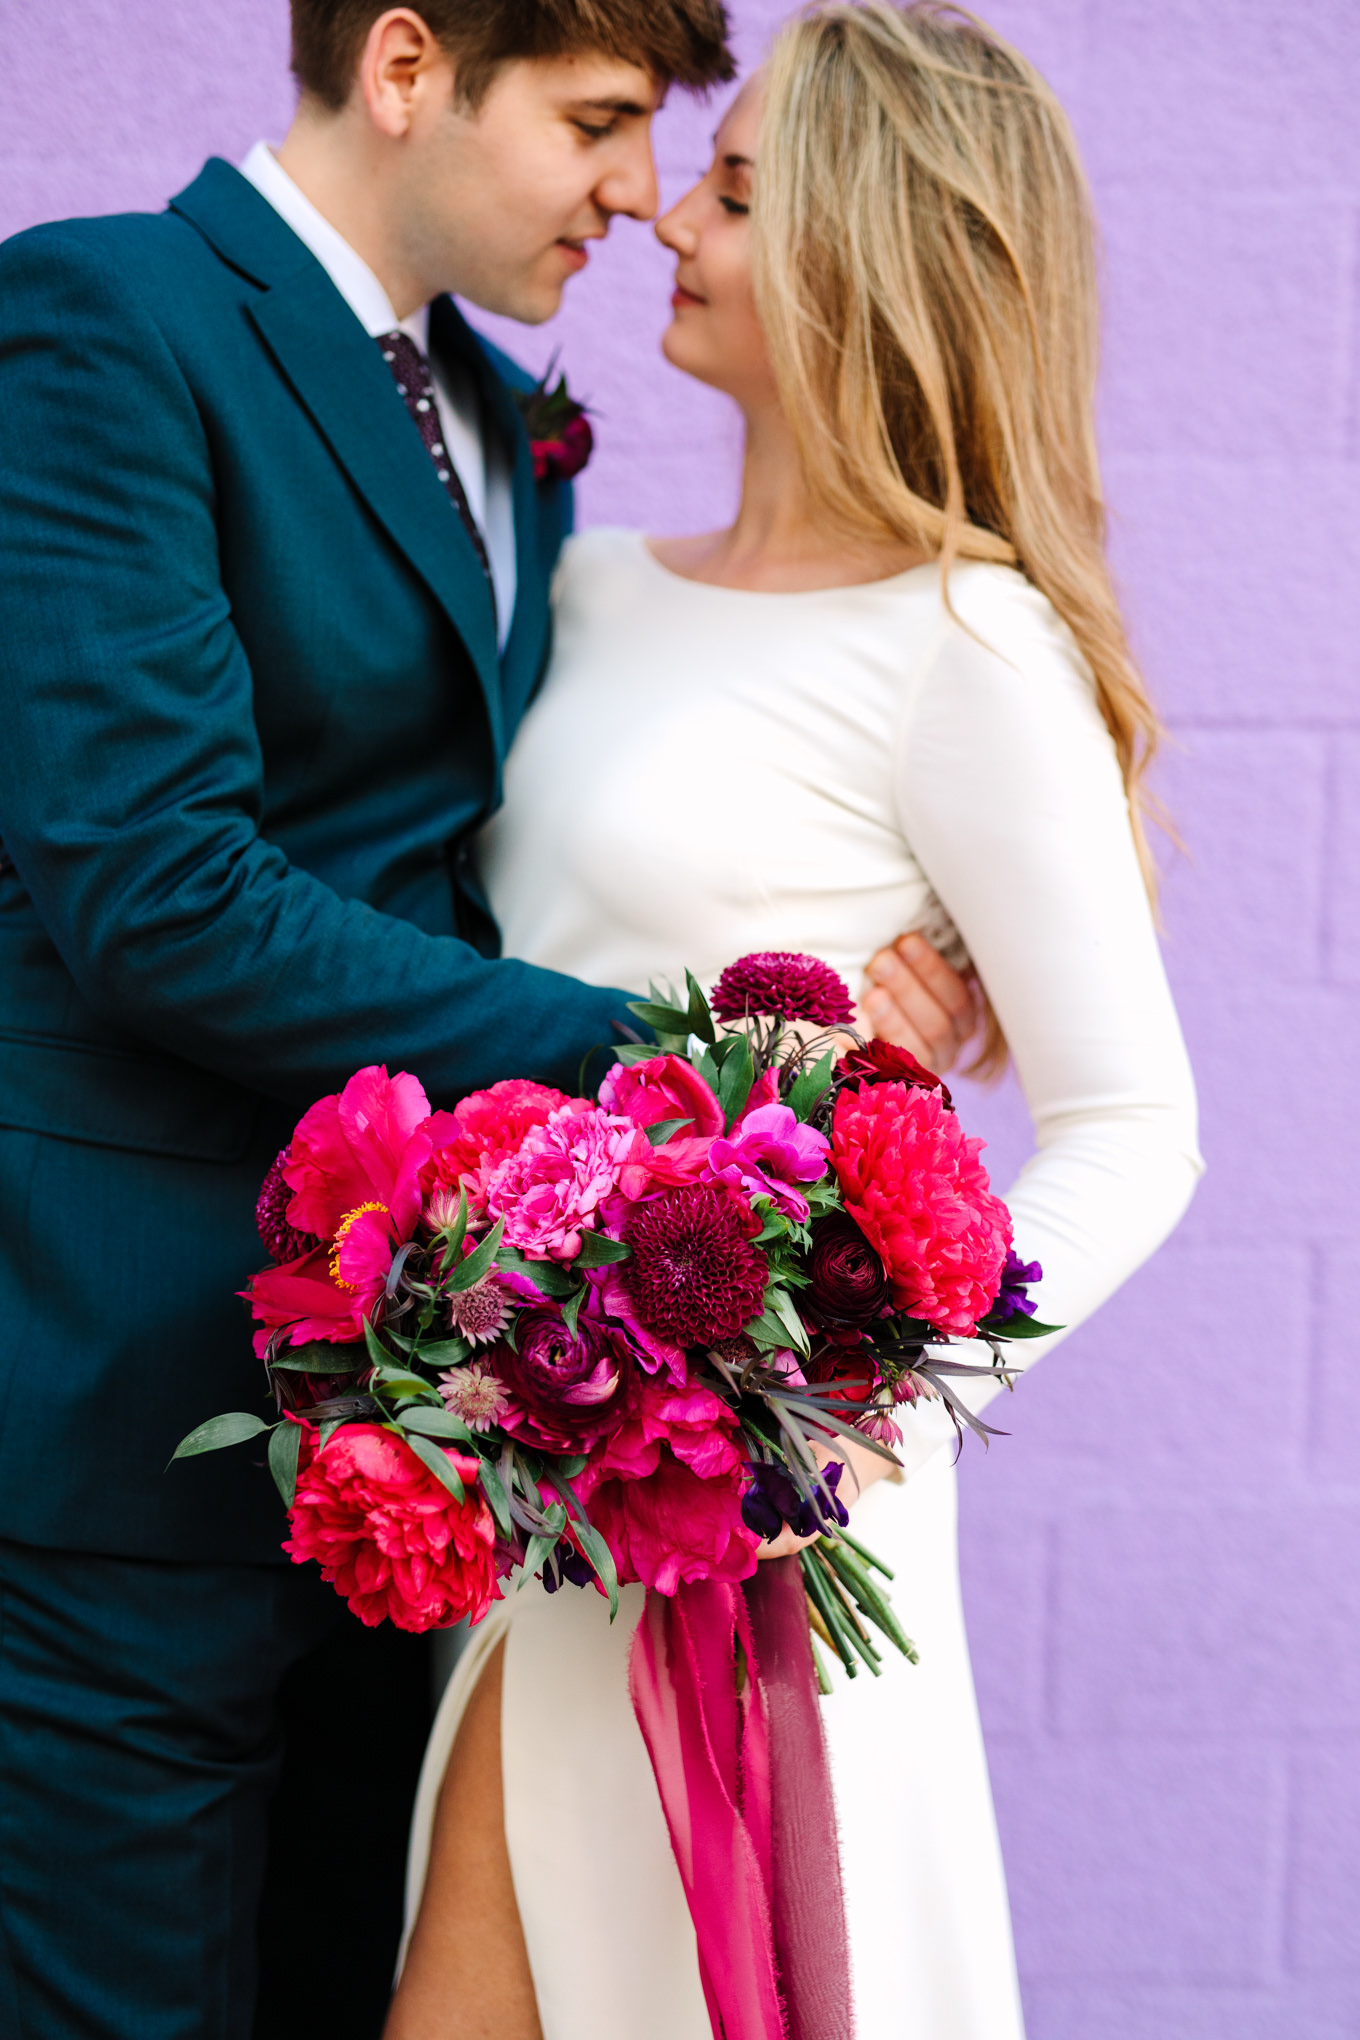 Close up on jewel tone bouquet at colorful Saguaro Hotel | Colorful jewel tone Palm Springs elopement | Fresh and colorful photography for fun-loving couples in Southern California | #colorfulelopement #palmspringselopement #elopementphotography #palmspringswedding Source: Mary Costa Photography | Los Angeles